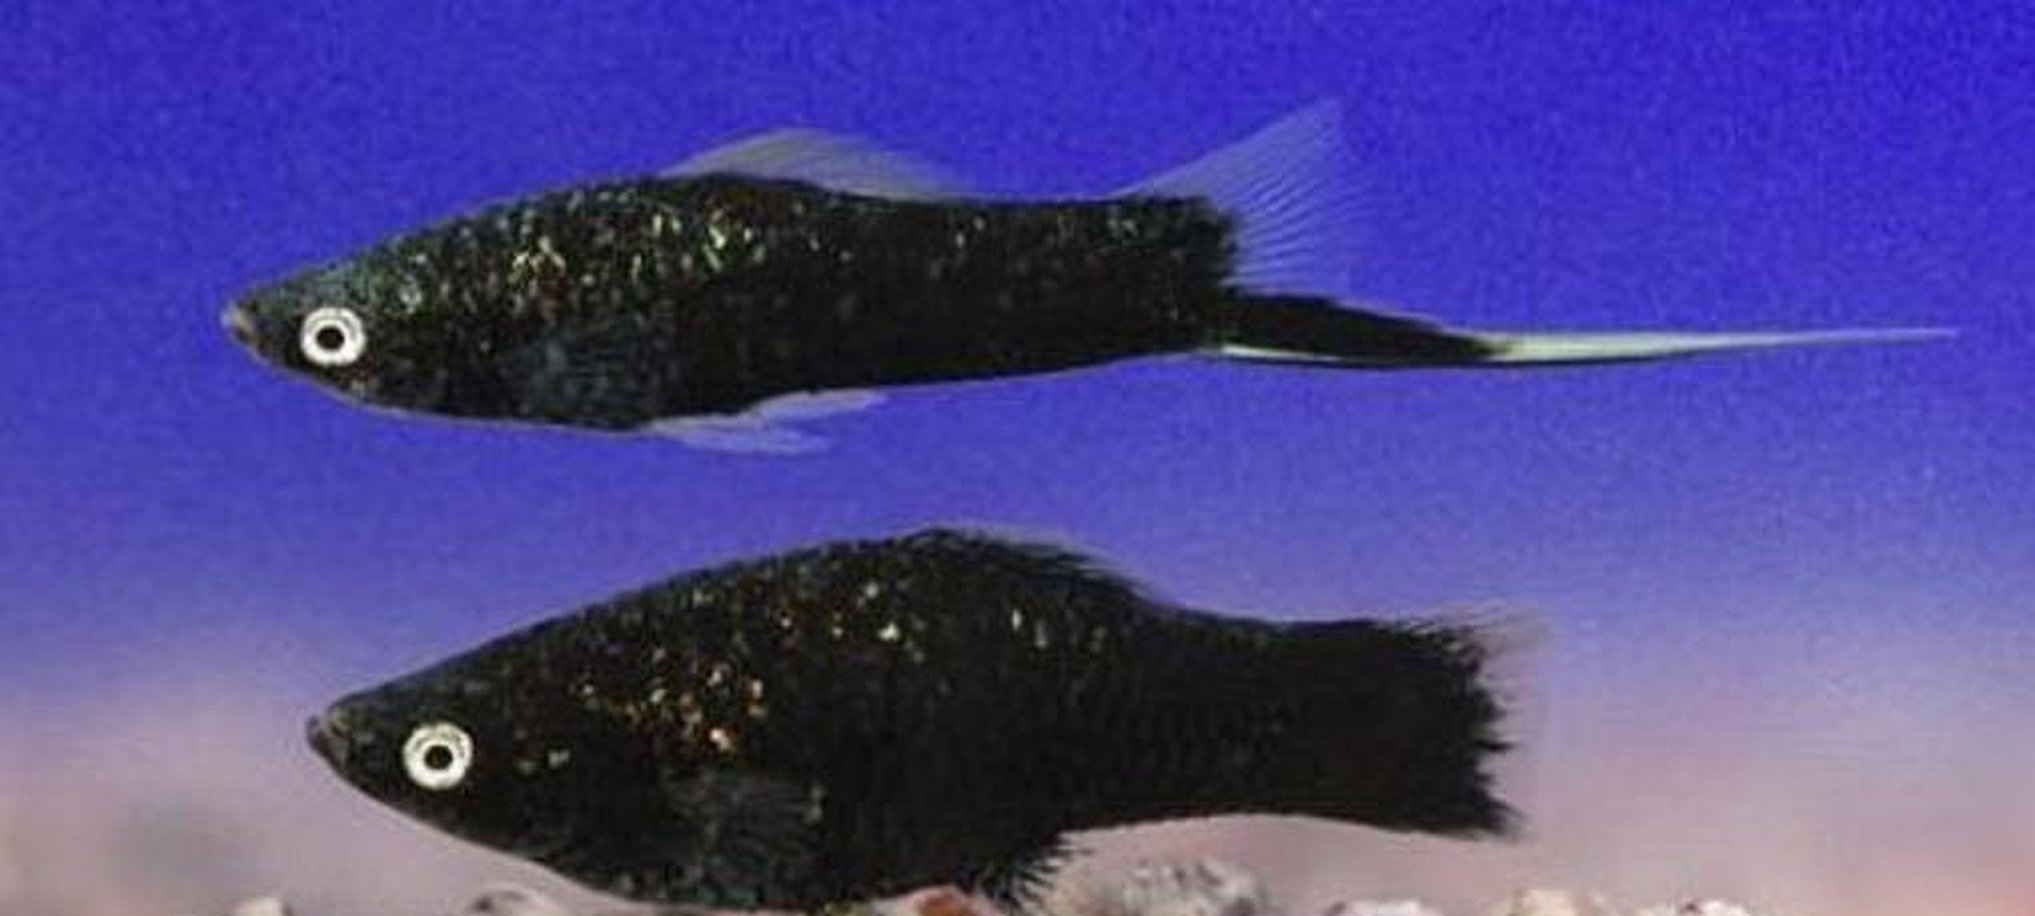 X15 Black Swordtail Fish - 1" - 2" Each - Freshwater Fish-Freshwater Fish Package-www.YourFishStore.com